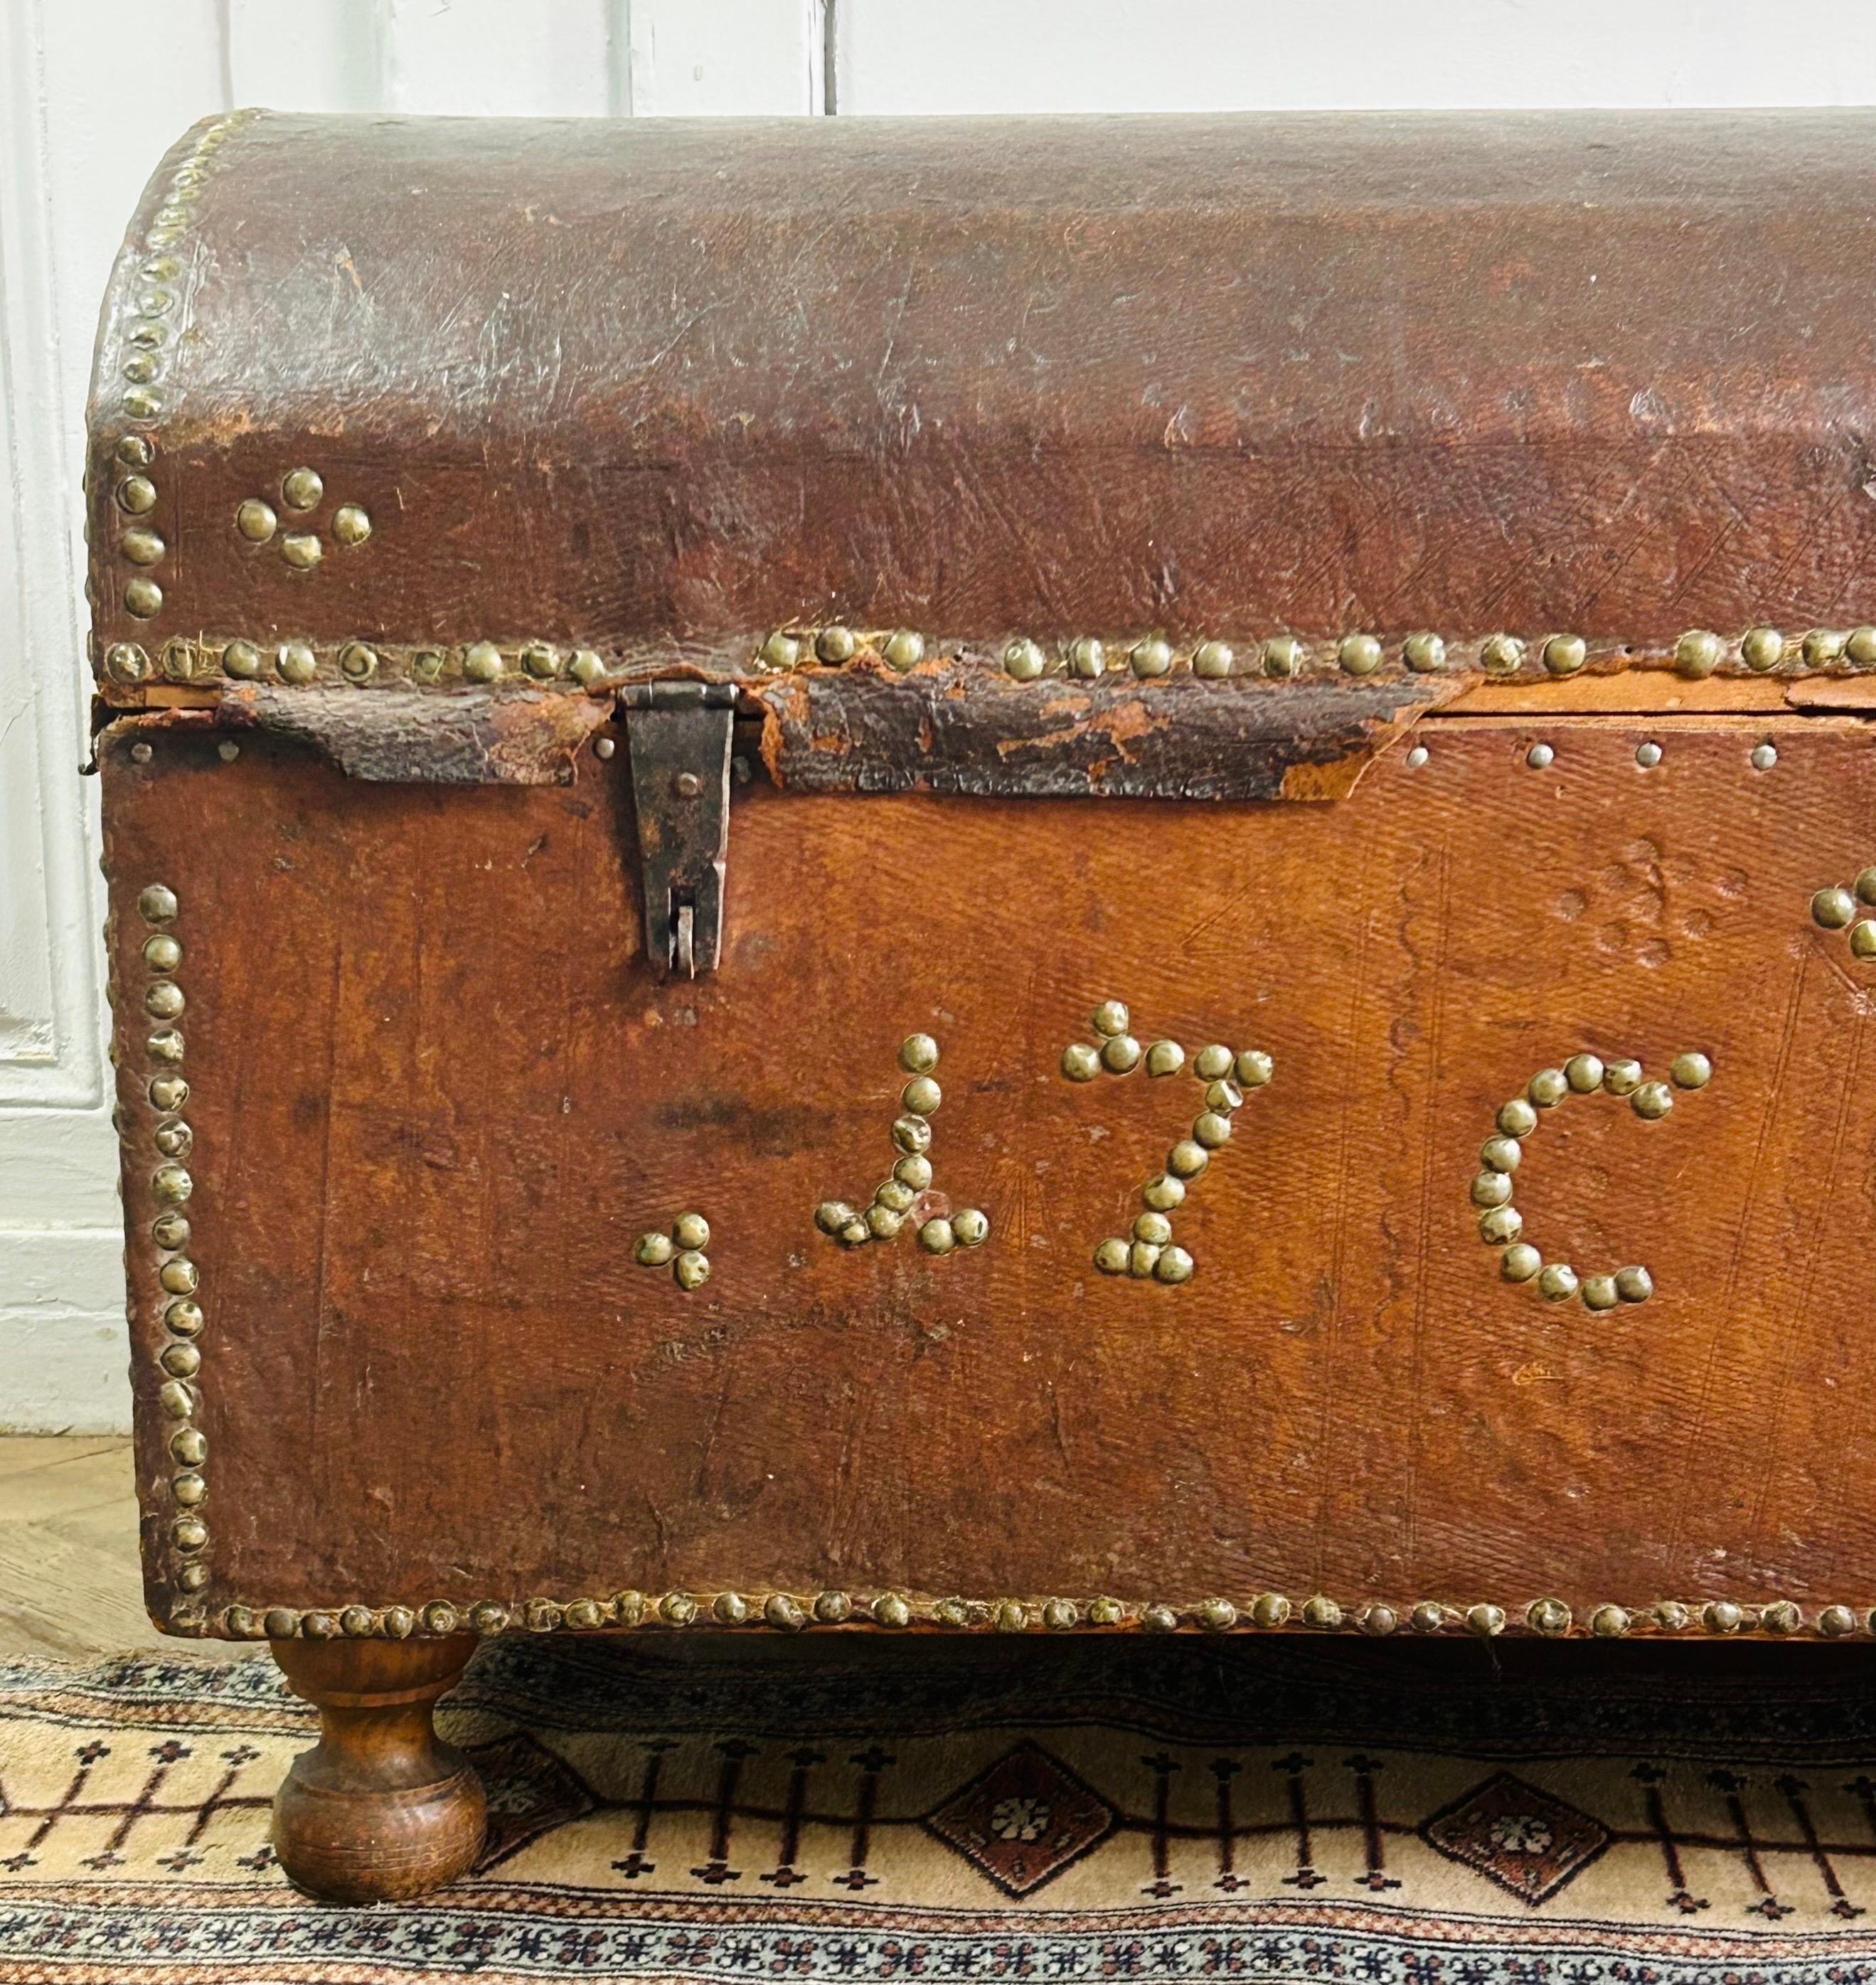 Italian Trunk - Dome Chest Wrapped in Studded Leather - Italy - 18th Louis XV Period